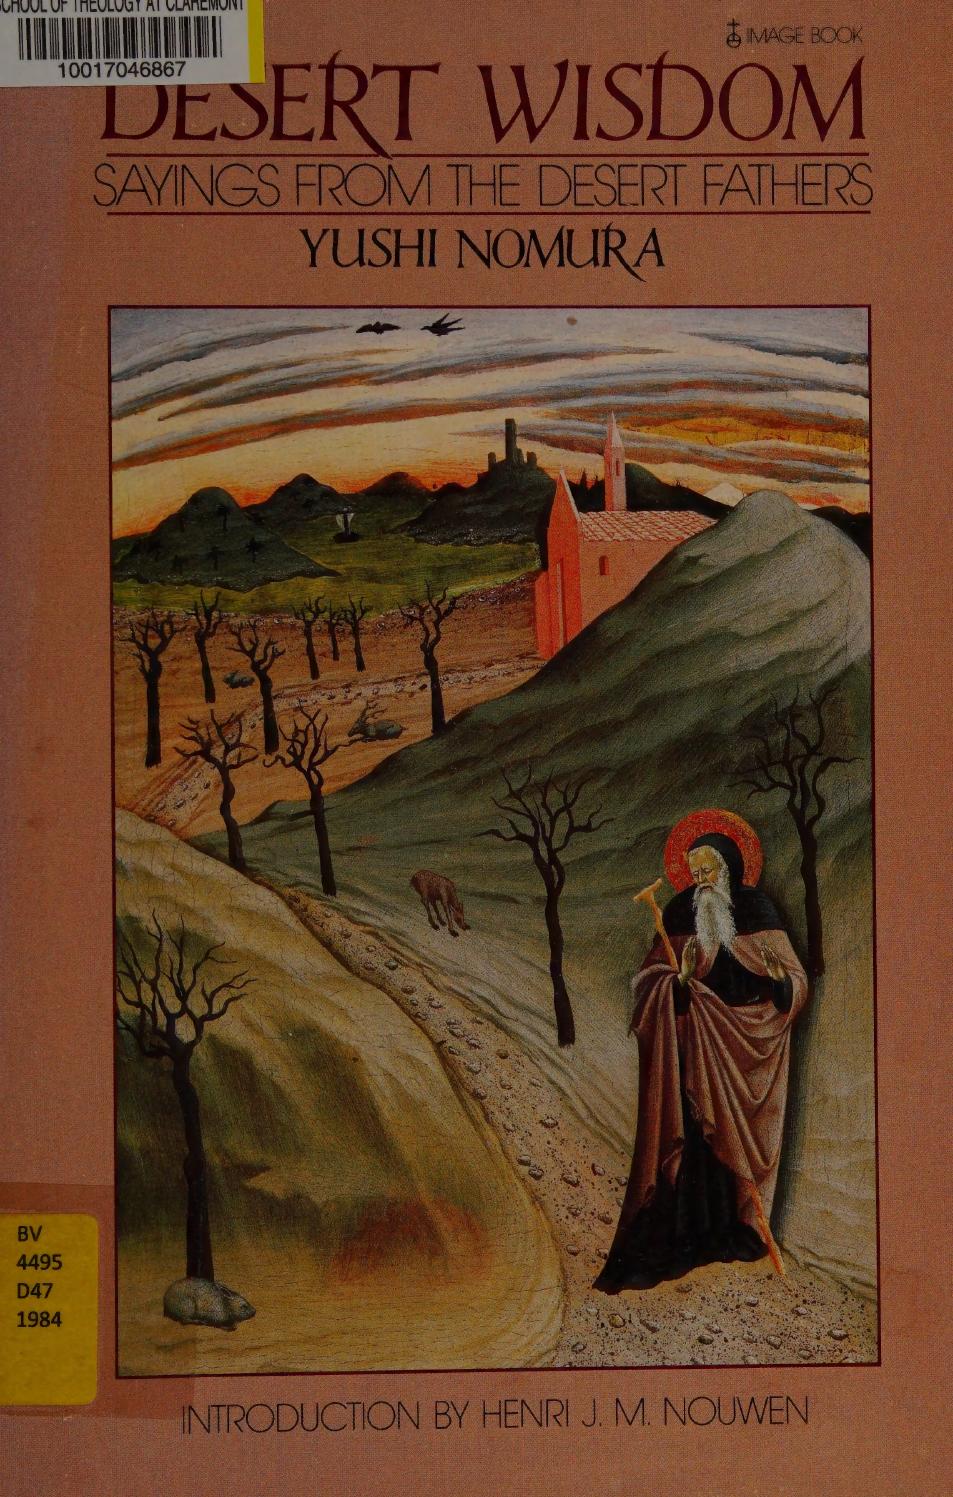 Desert wisdom : sayings from the Desert Fathers